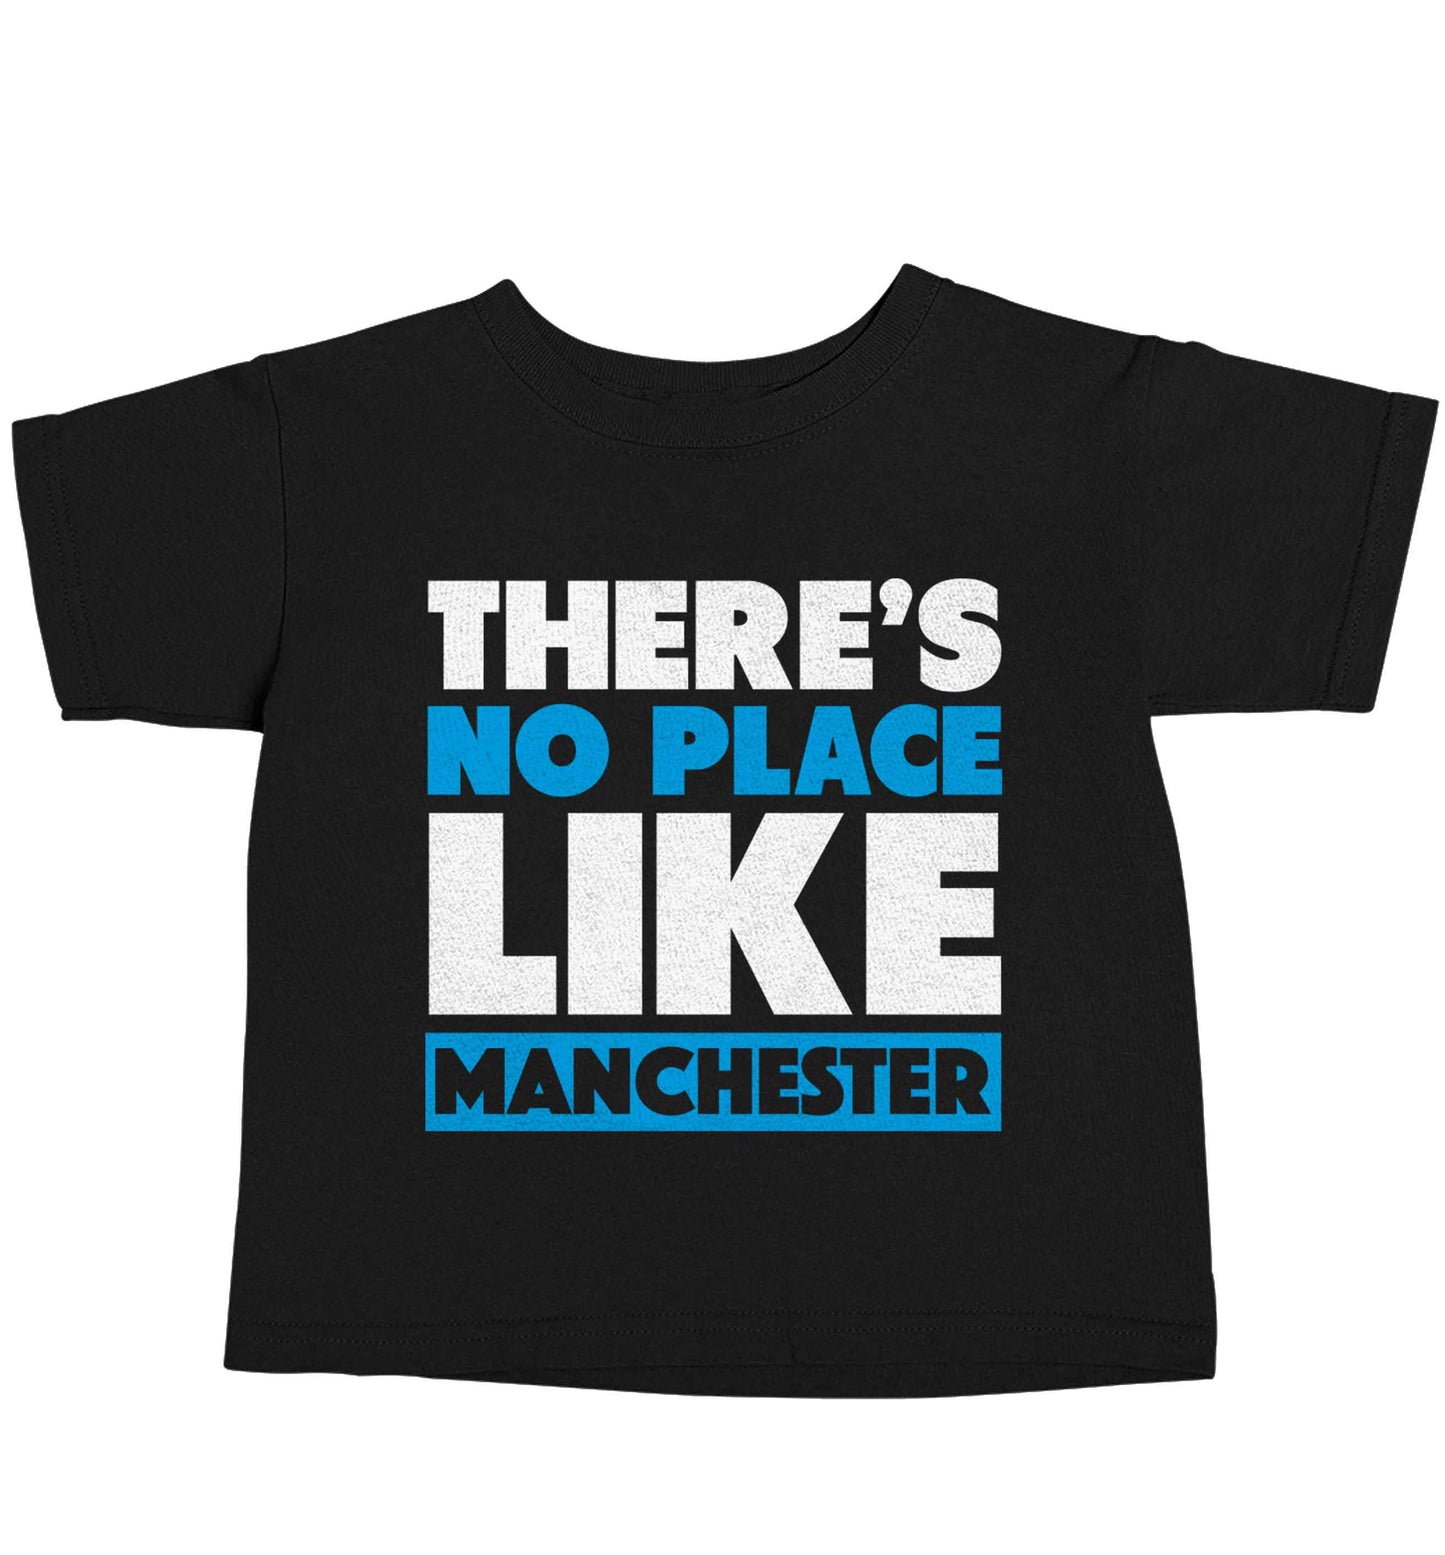 There's no place like Manchester Black baby toddler Tshirt 2 years